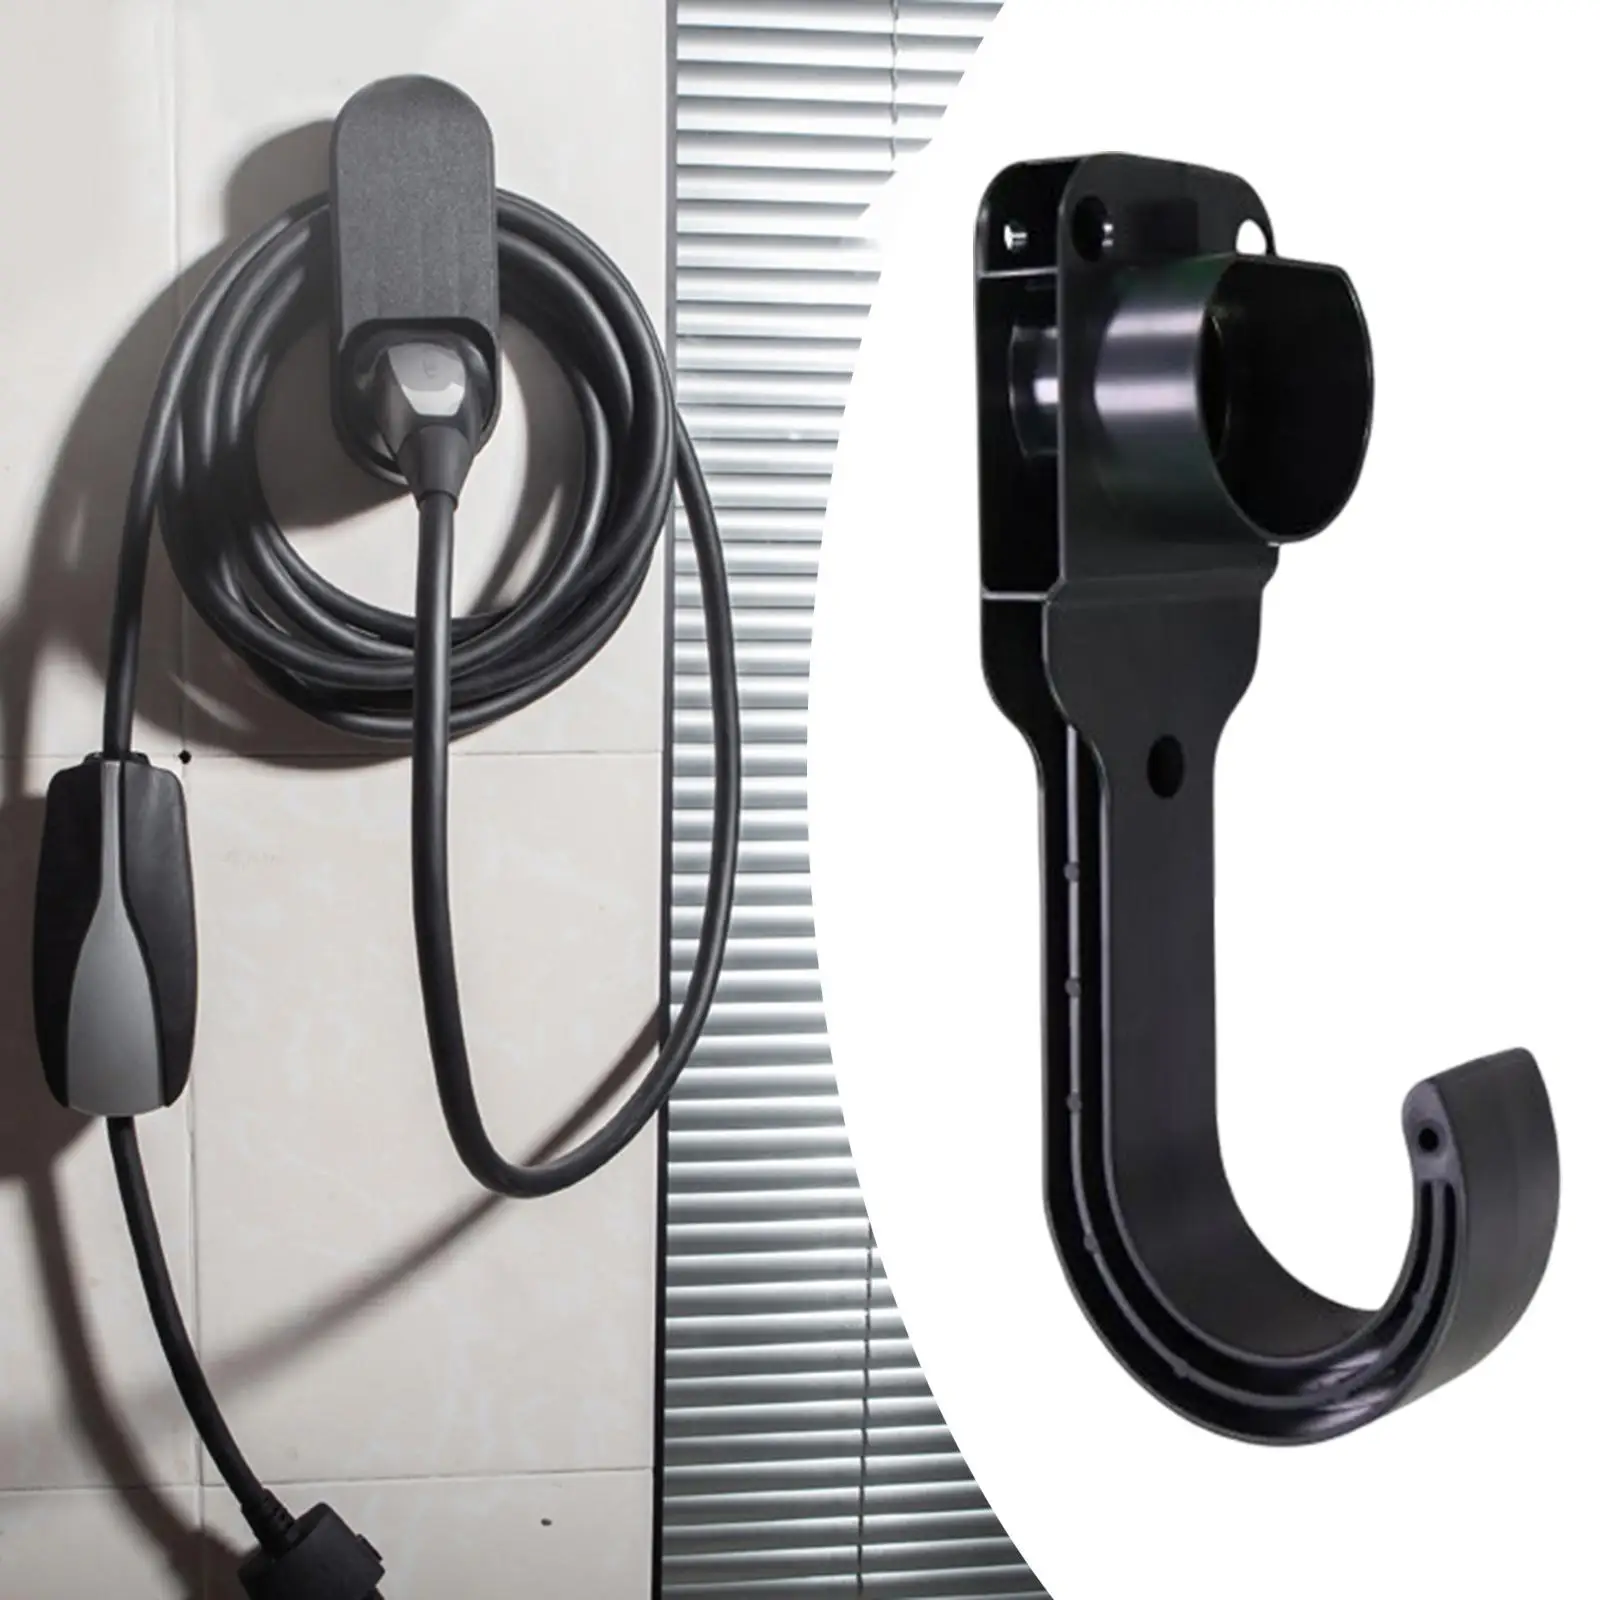 Holder Car Charging Cable Accessory Wall Mount Bracket Electric Vehicle